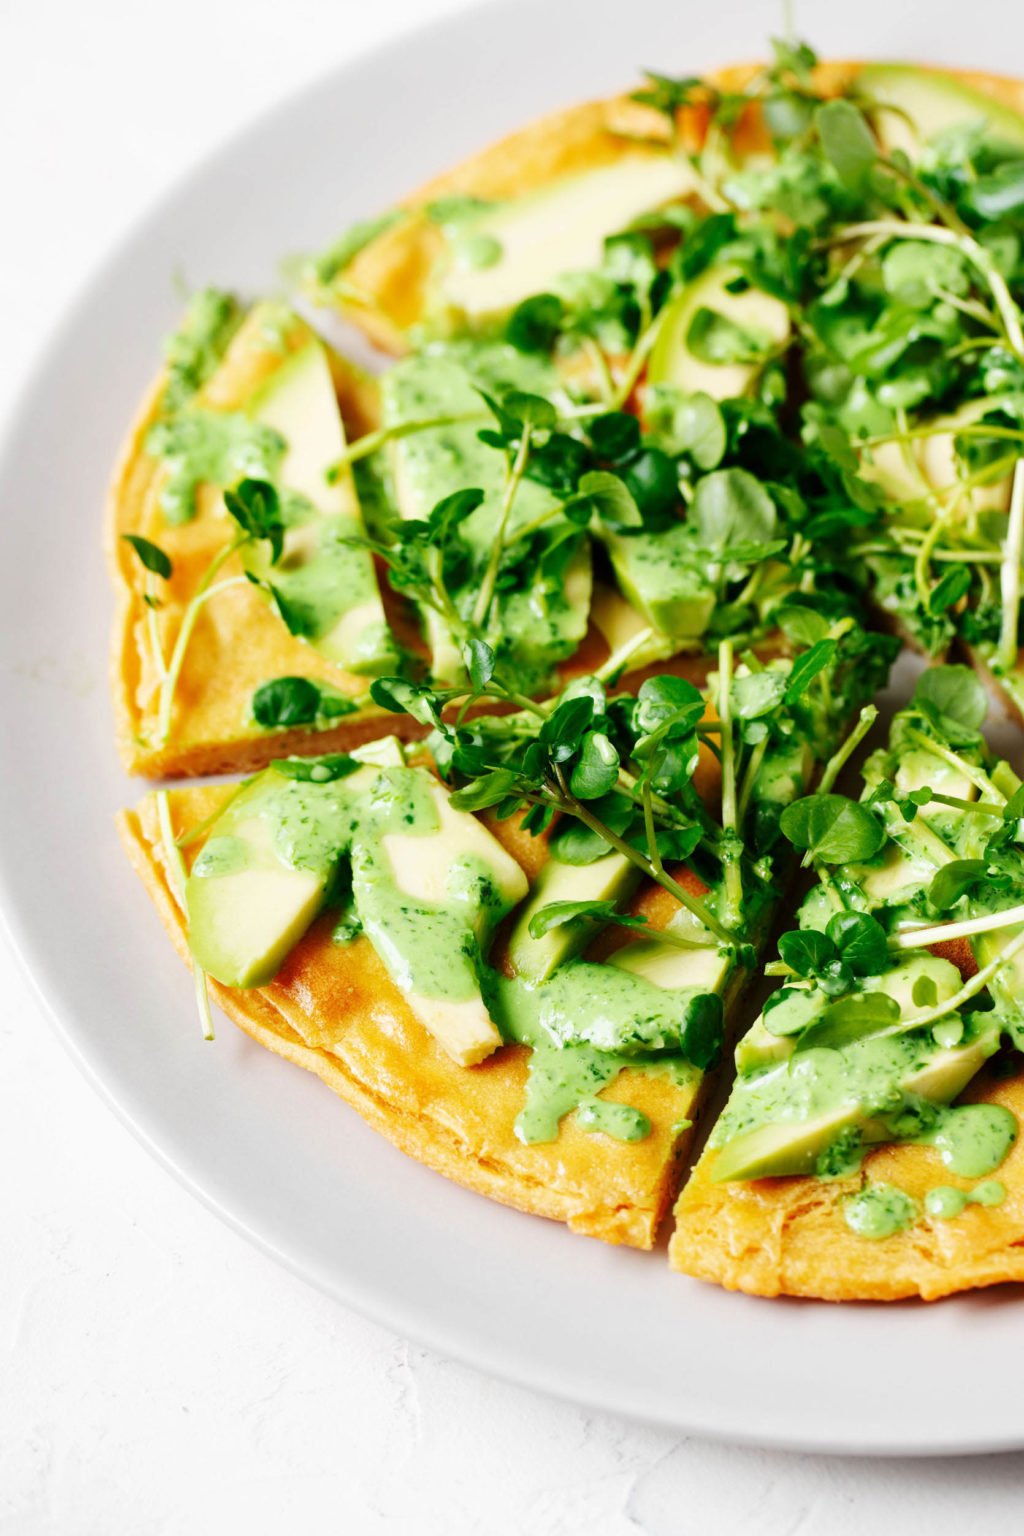 A chickpea pancake has been topped with vibrant spring greens and a creamy, green herb sauce.